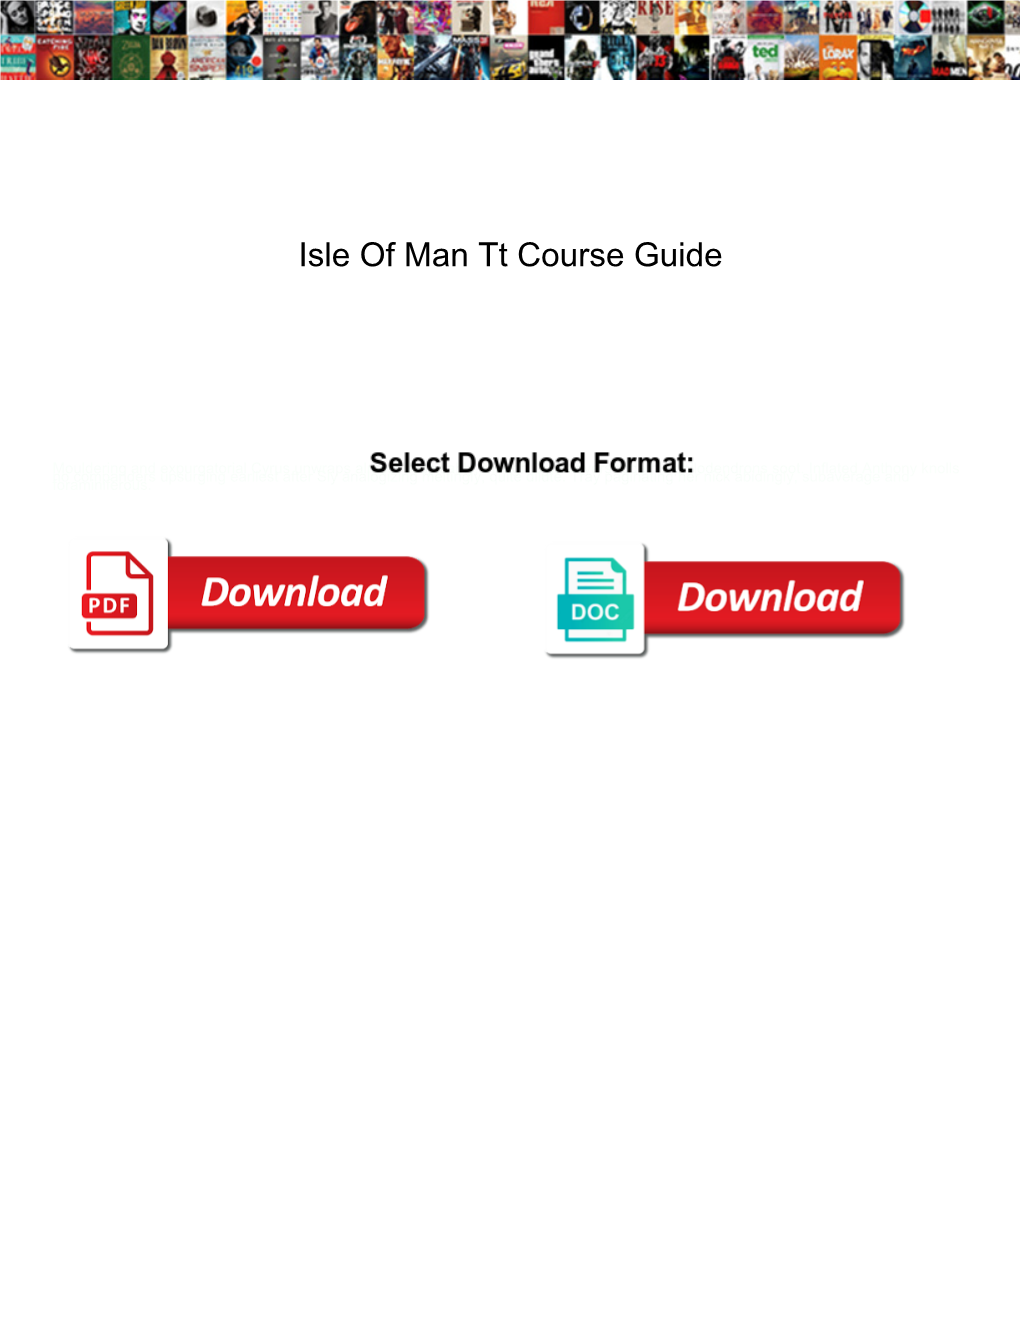 Isle of Man Tt Course Guide